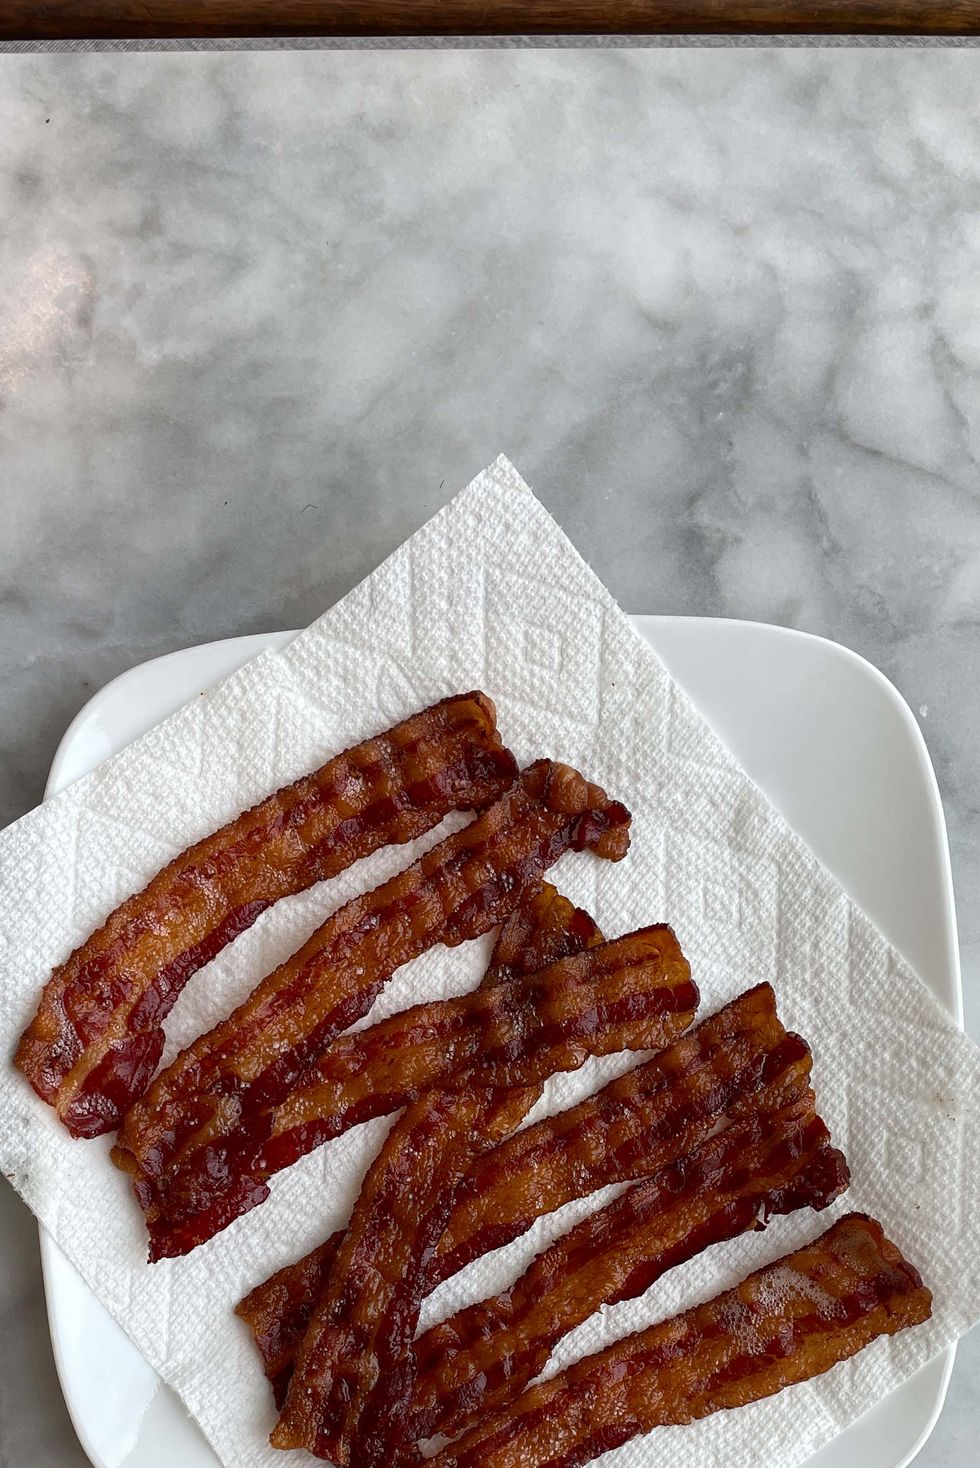 https://hips.hearstapps.com/hmg-prod/images/cooked-bacon-on-plate-jpg-6494664b42736.jpg?crop=0.590xw:0.663xh;0.211xw,0.166xh&resize=980:*